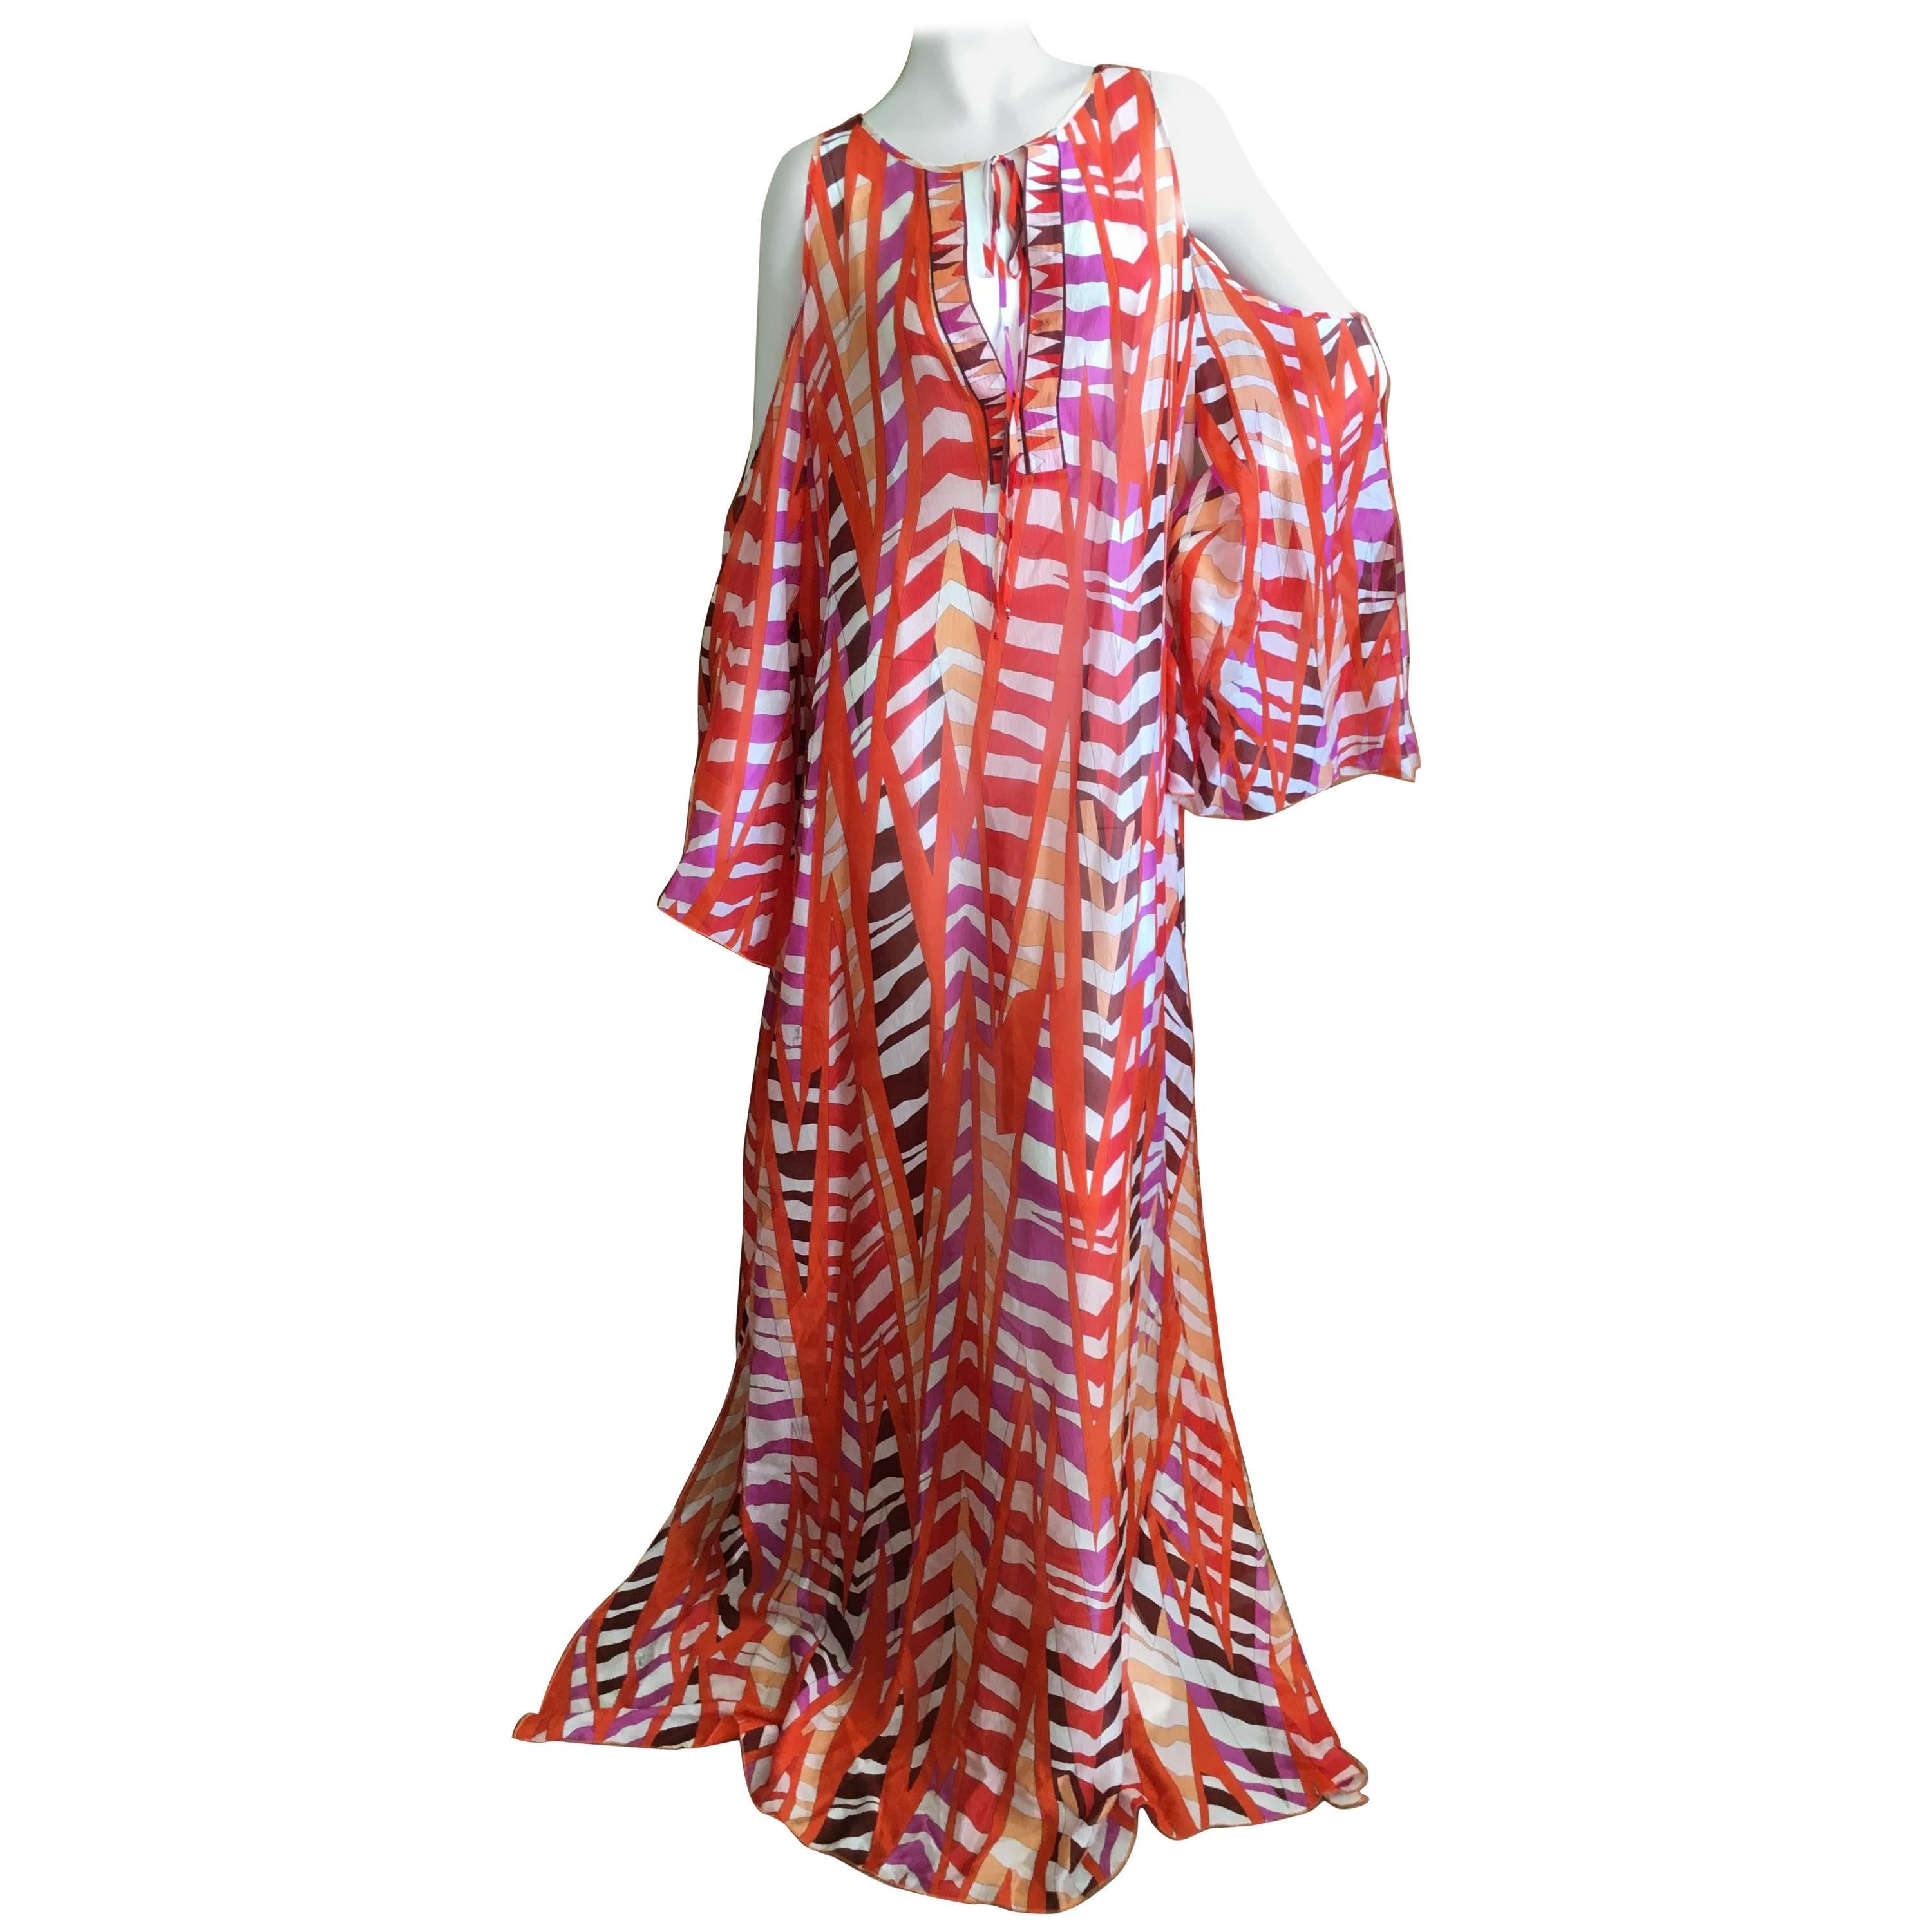 Emilio Pucci Sheer Cold Shoulder Patterned Caftan New with Tags Size L For Sale